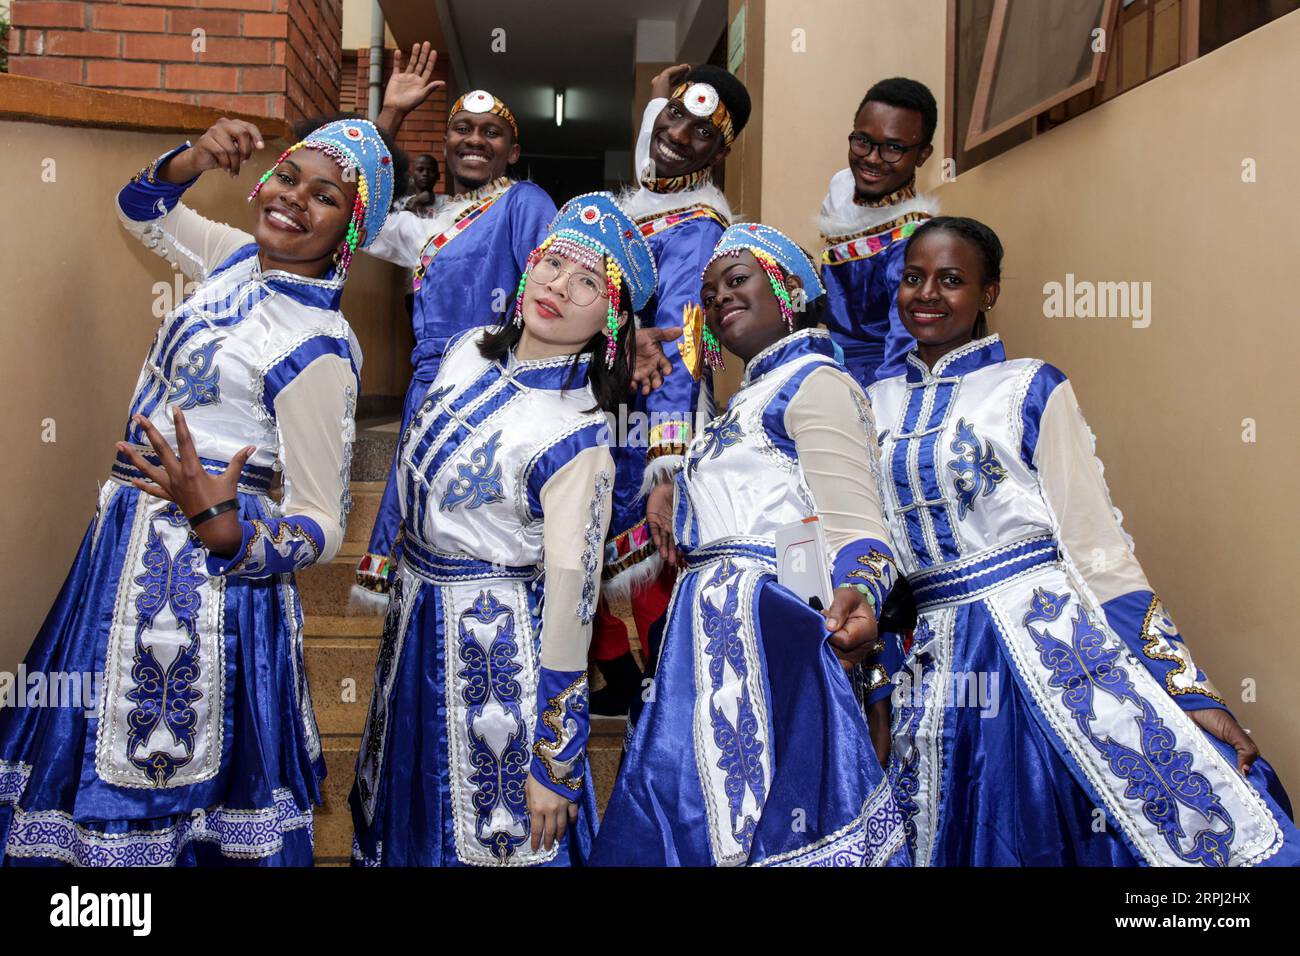 191124 -- KAMPALA, Nov. 24, 2019 Xinhua -- Students of the Confucius Institute at Makerere University pose for a group photo after performing at an event celebrating the 5th anniversary of the founding of the institute, in Kampala, Uganda, Nov. 23, 2019. Confucius Institute at Makerere University, Uganda s top university, on Saturday celebrated its fifth anniversary. The institution, as the nexus of Chinese language teaching, is playing a major role for cultural exchange between Uganda and China. Photo by Hajarah Nalwadda/Xinhua UGANDA-KAMPALA-MAKERERE UNIVERSITY-CONFUCIUS INSTITUTE-ANNIVERSAR Stock Photo